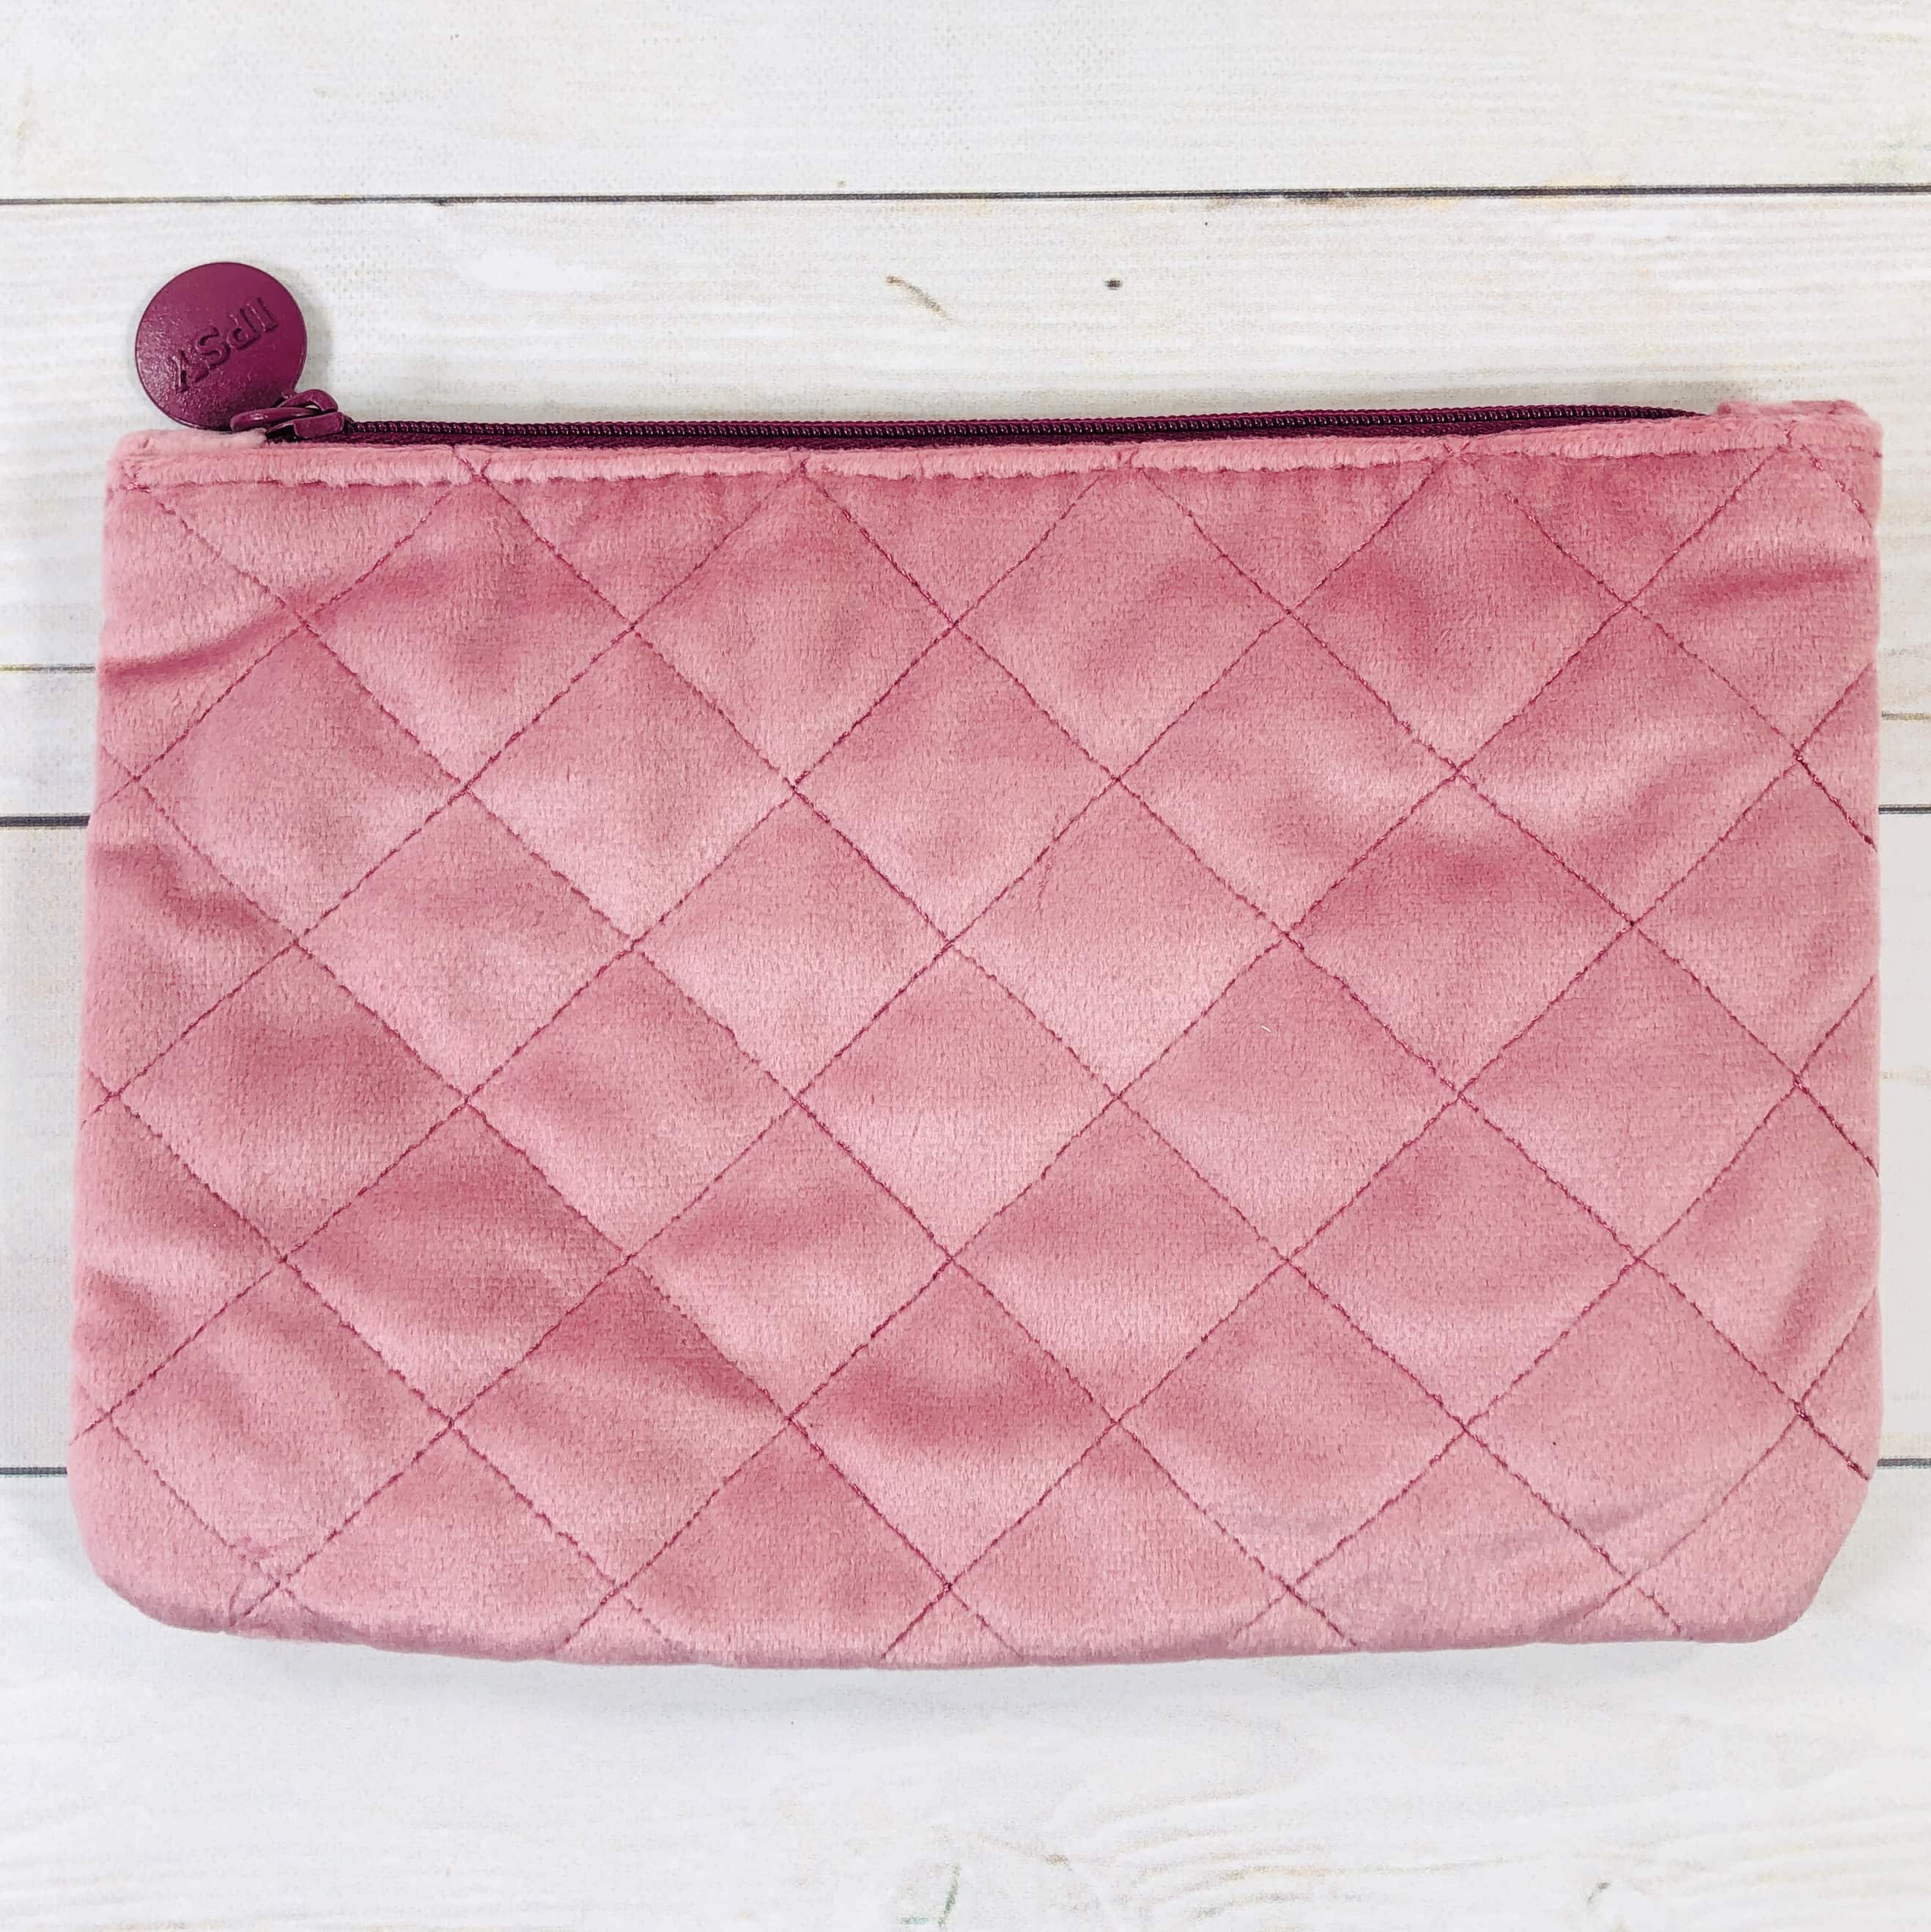 Ipsy Glam Bag February 2020 Review - Hello Subscription